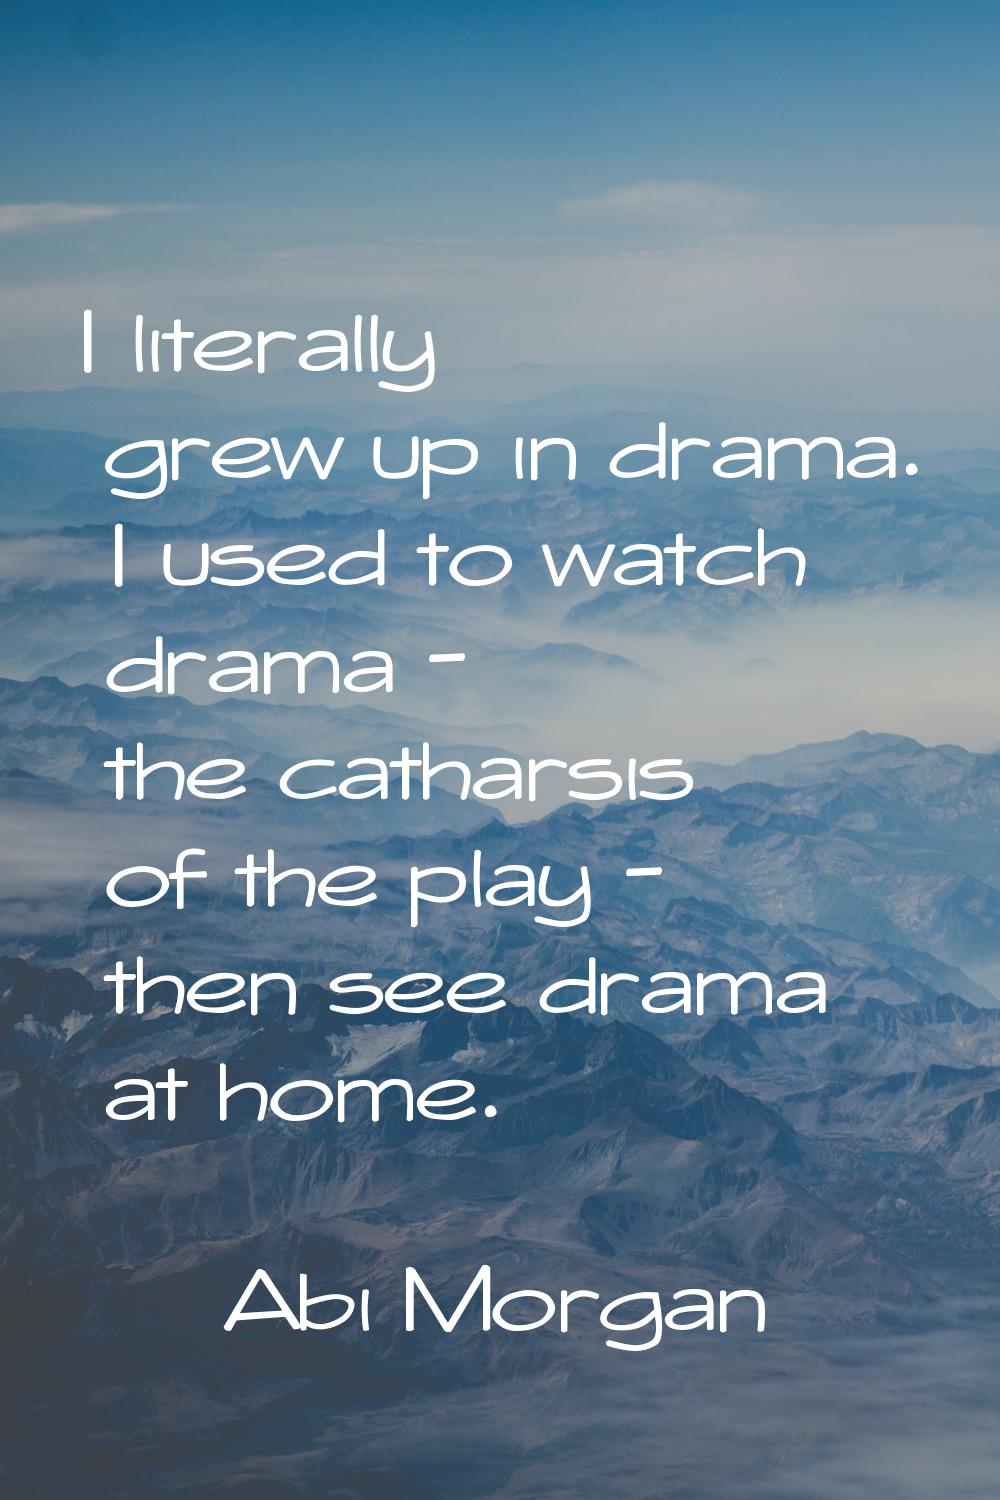 I literally grew up in drama. I used to watch drama - the catharsis of the play - then see drama at